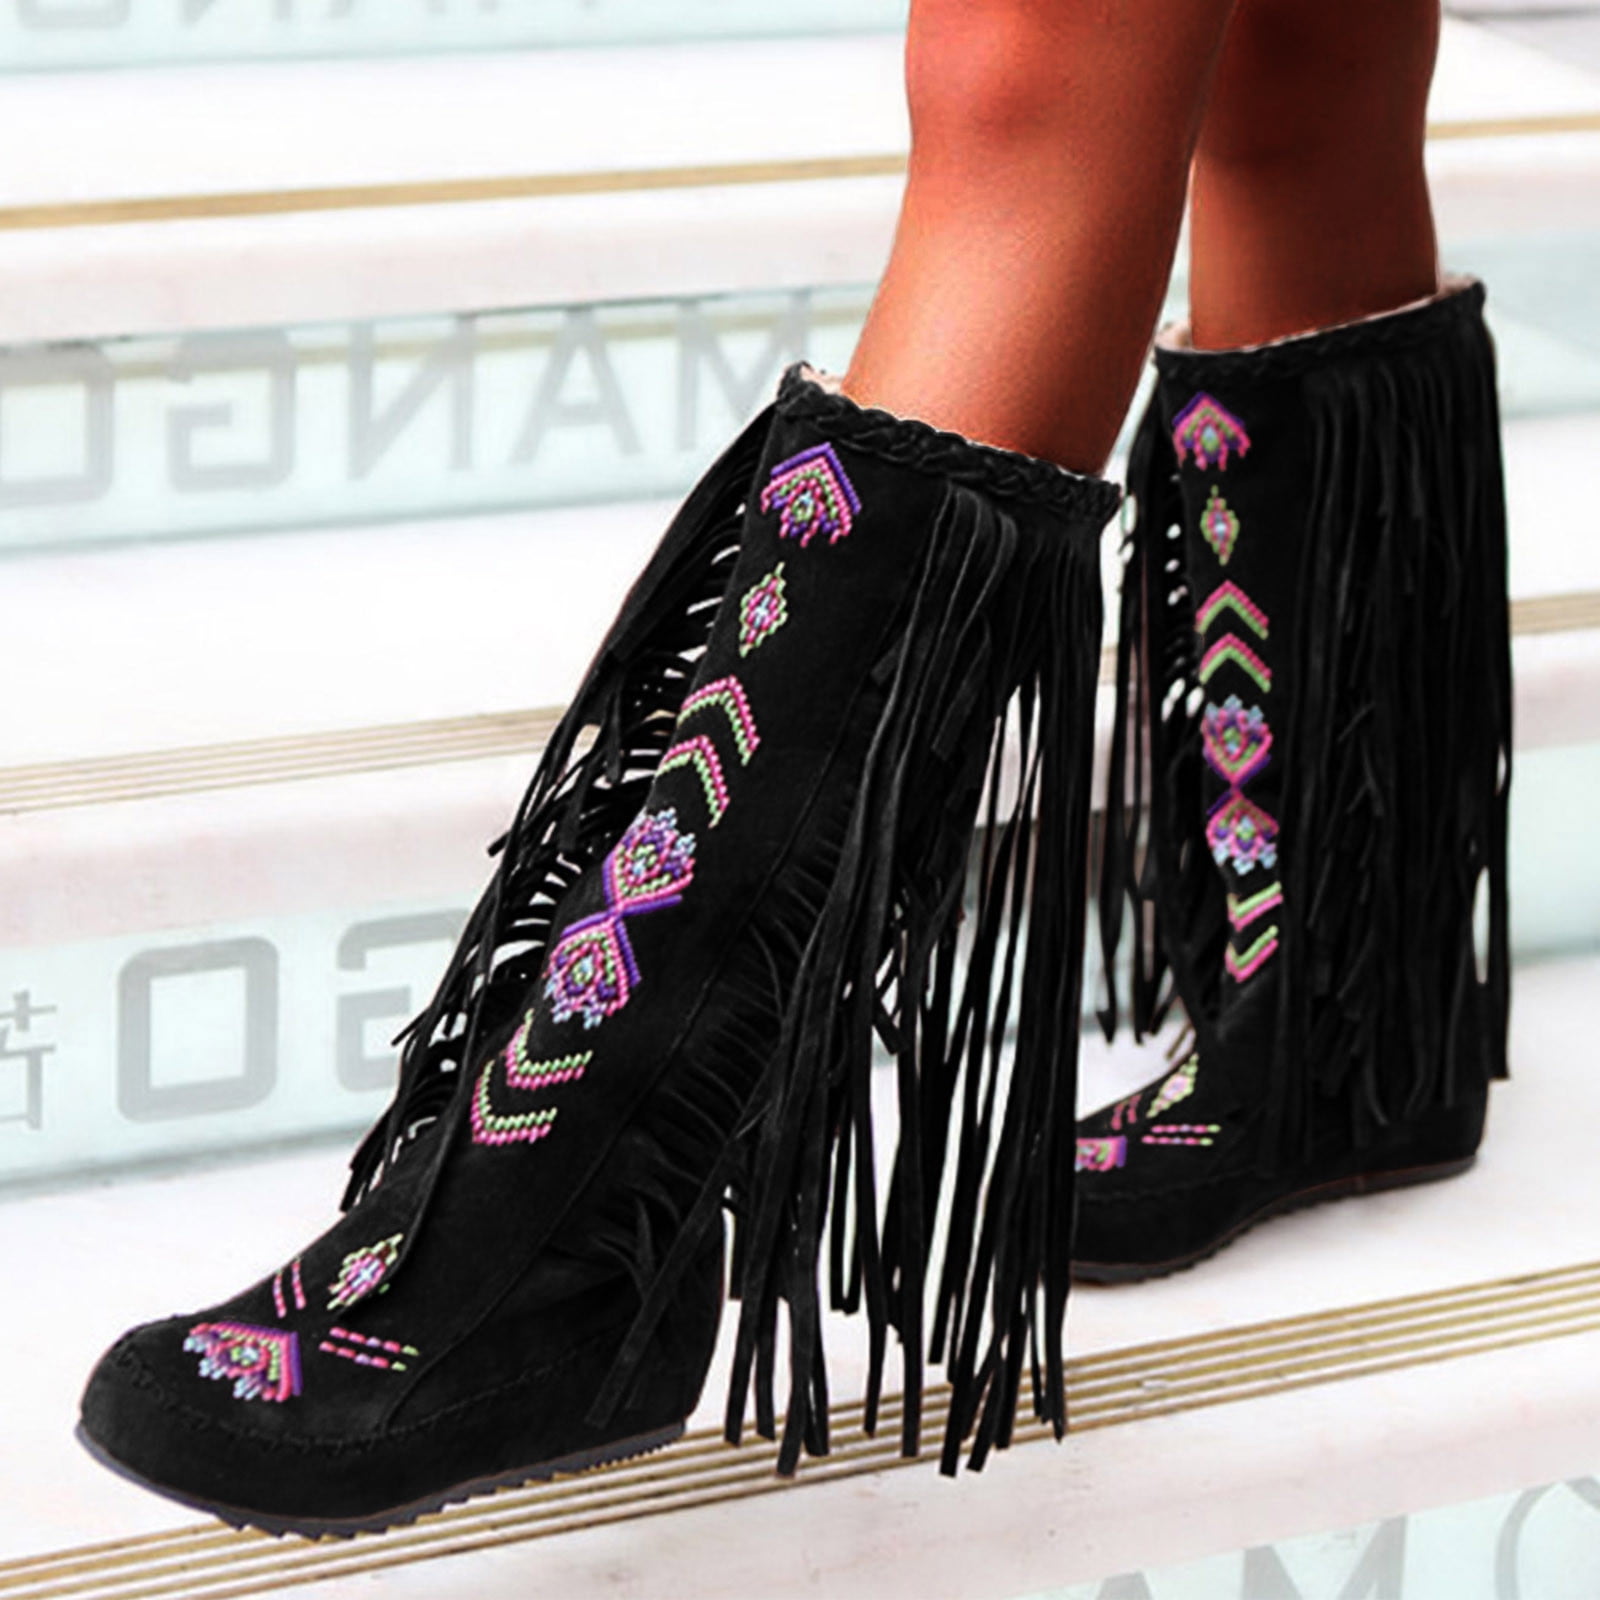 Wefuesd Woman Style Women Heels Fringe Flock Chinese Boots Boots